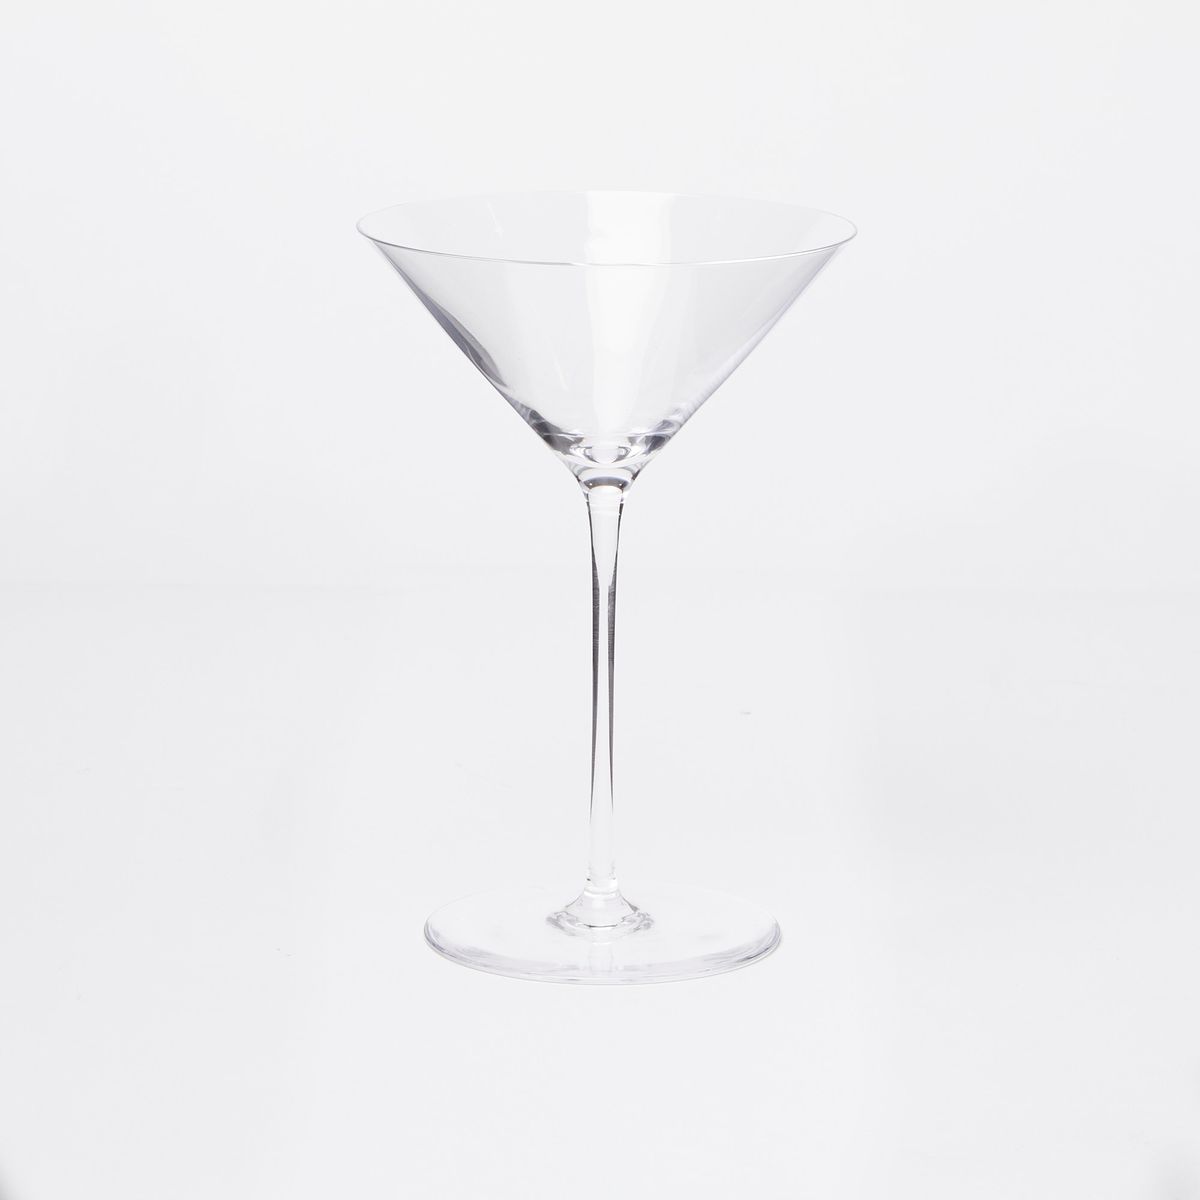 A clear empty martini glass on a white background